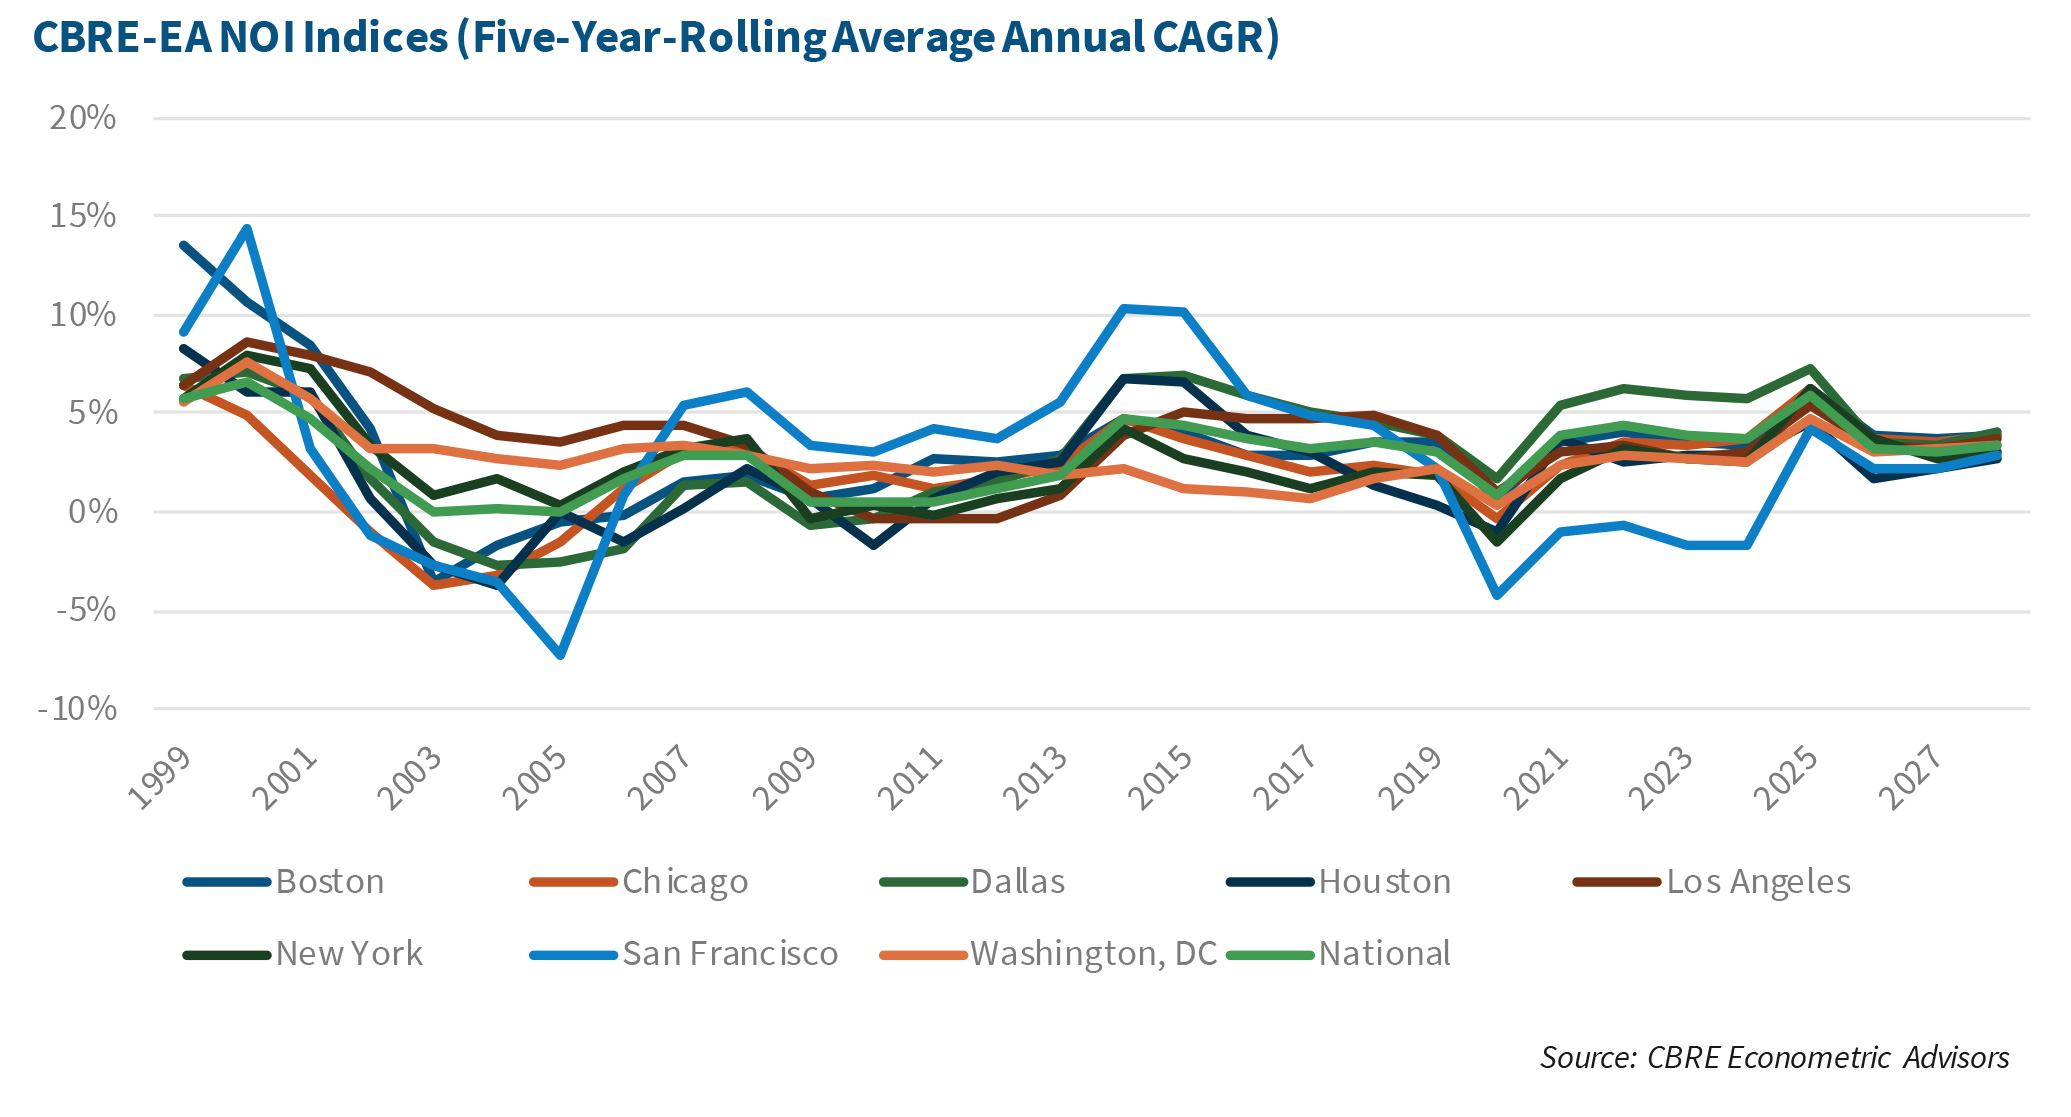 CBRE-EA NOI Indices (Five-Year-Rolling Average Annual CAGR)